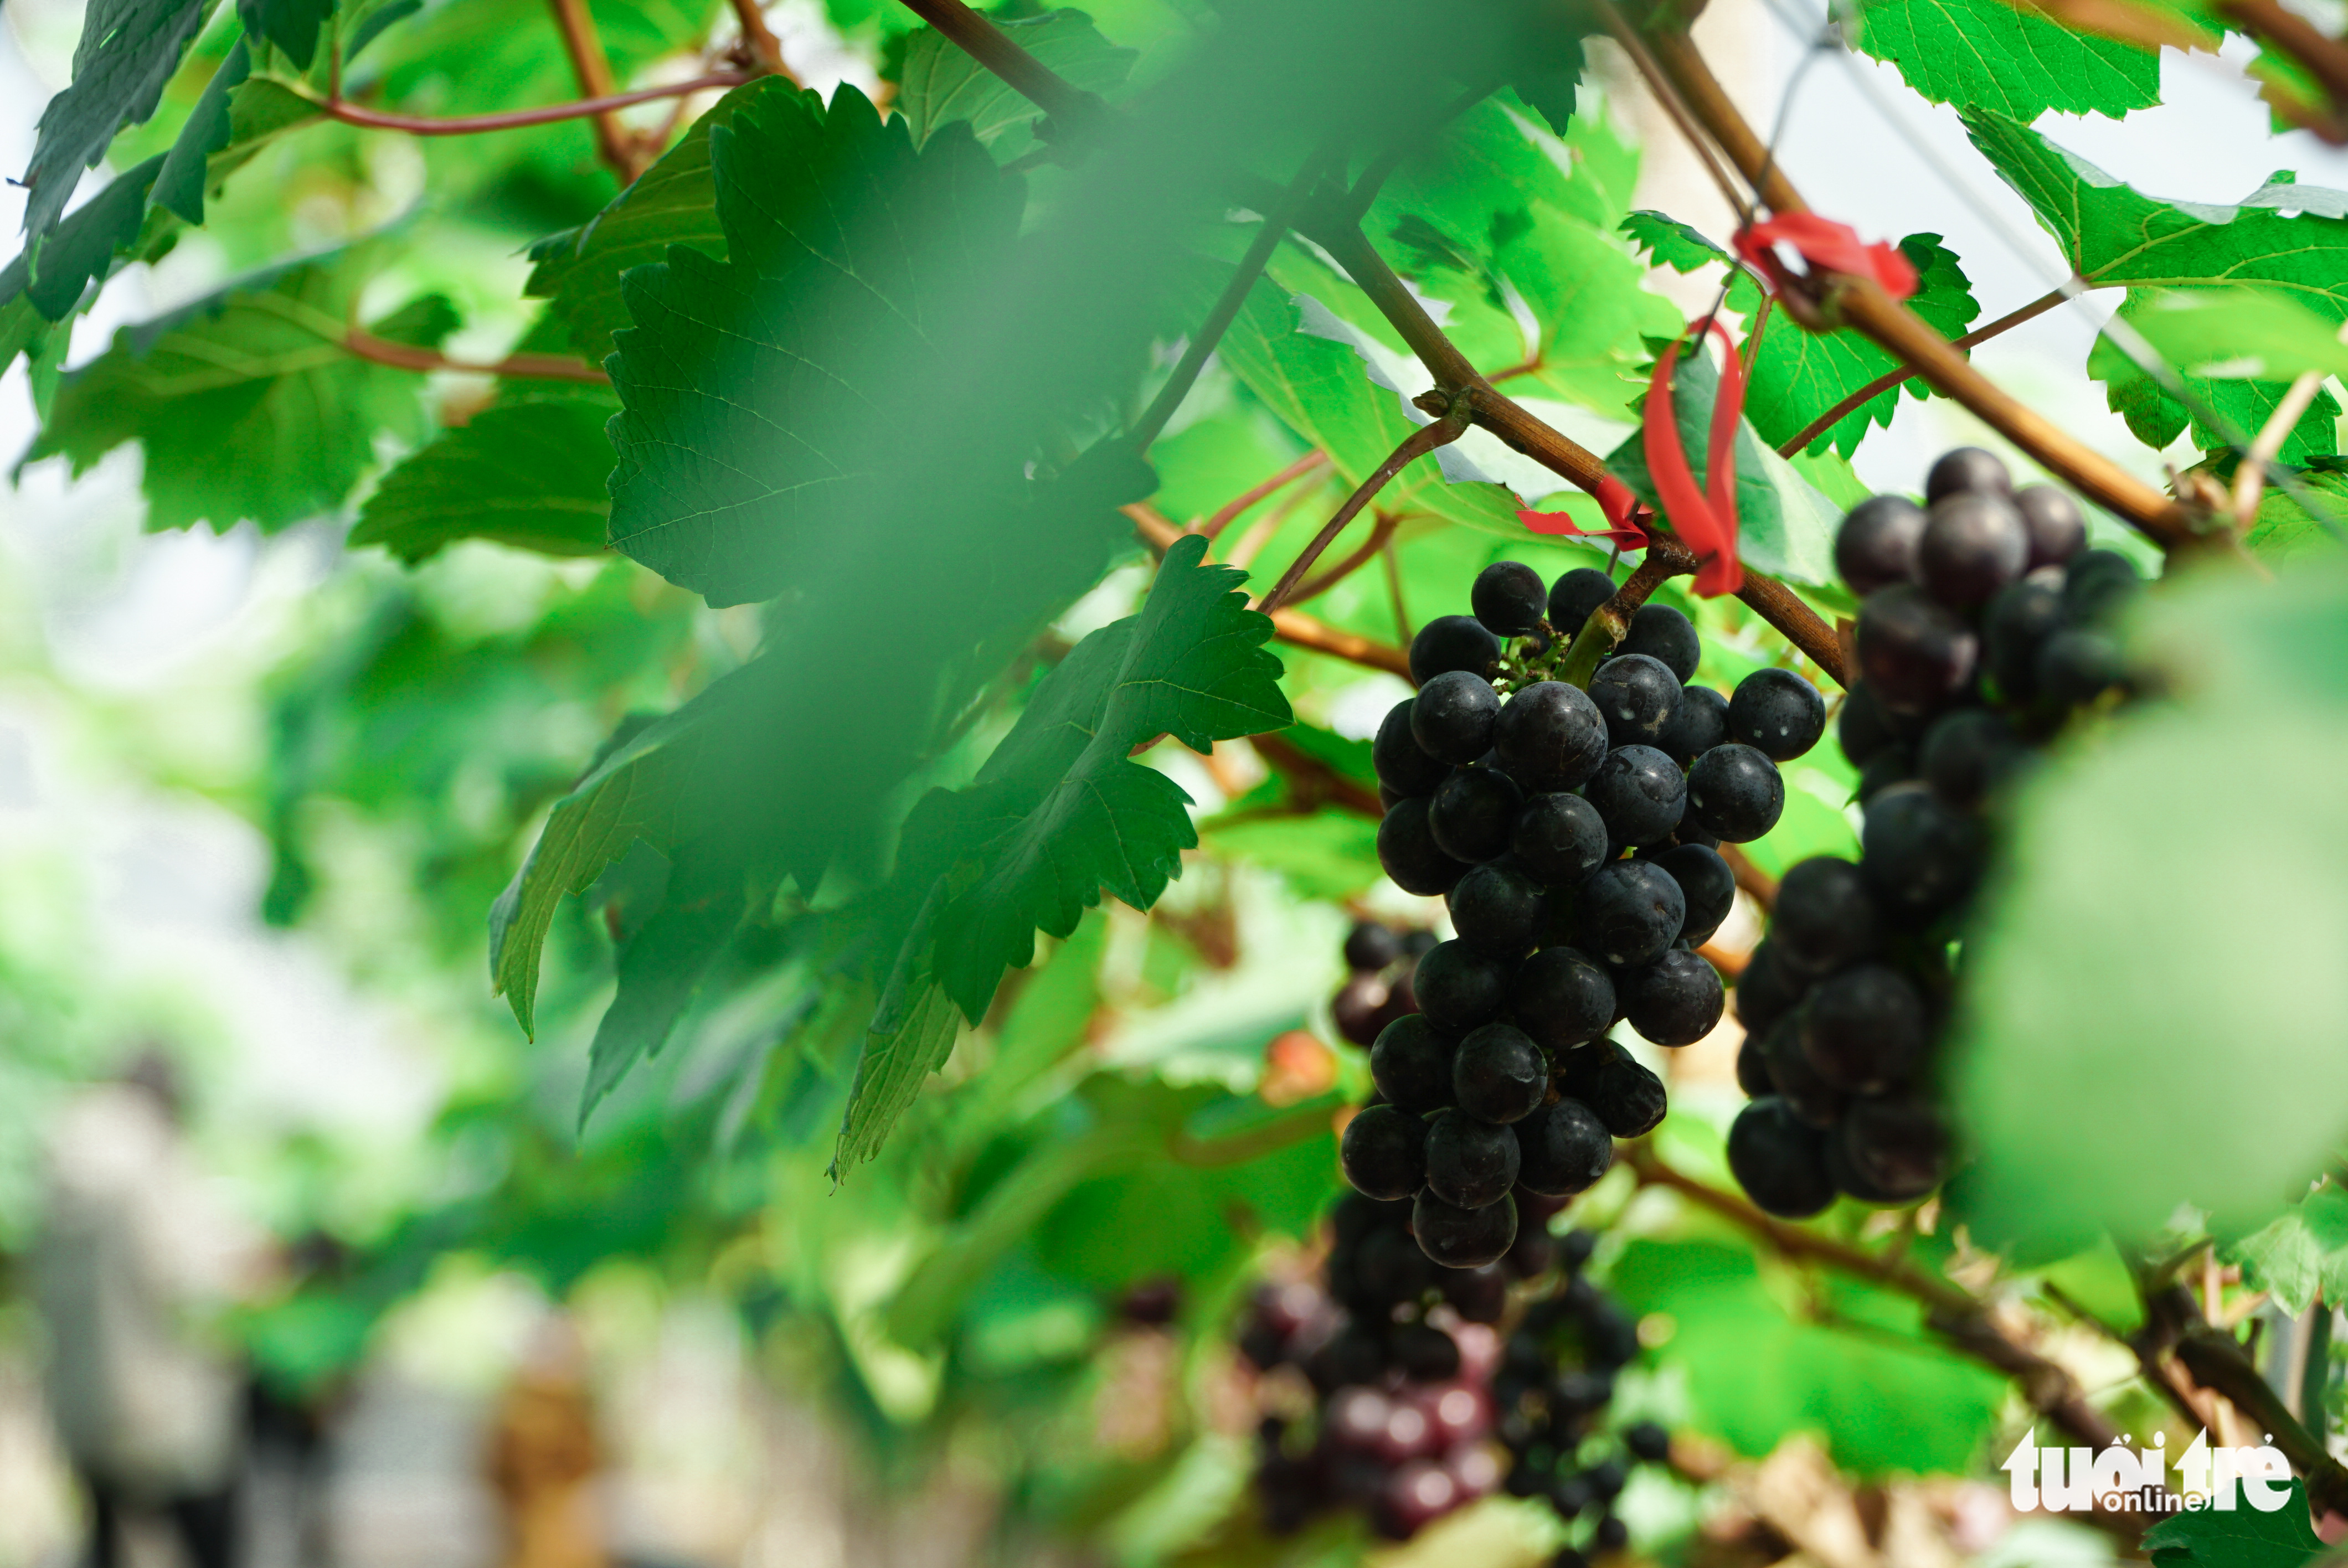 Ripe bunches of grapes at Vu Van Luc’s vineyard in Dong Anh District, Hanoi. Photo: Tuoi Tre